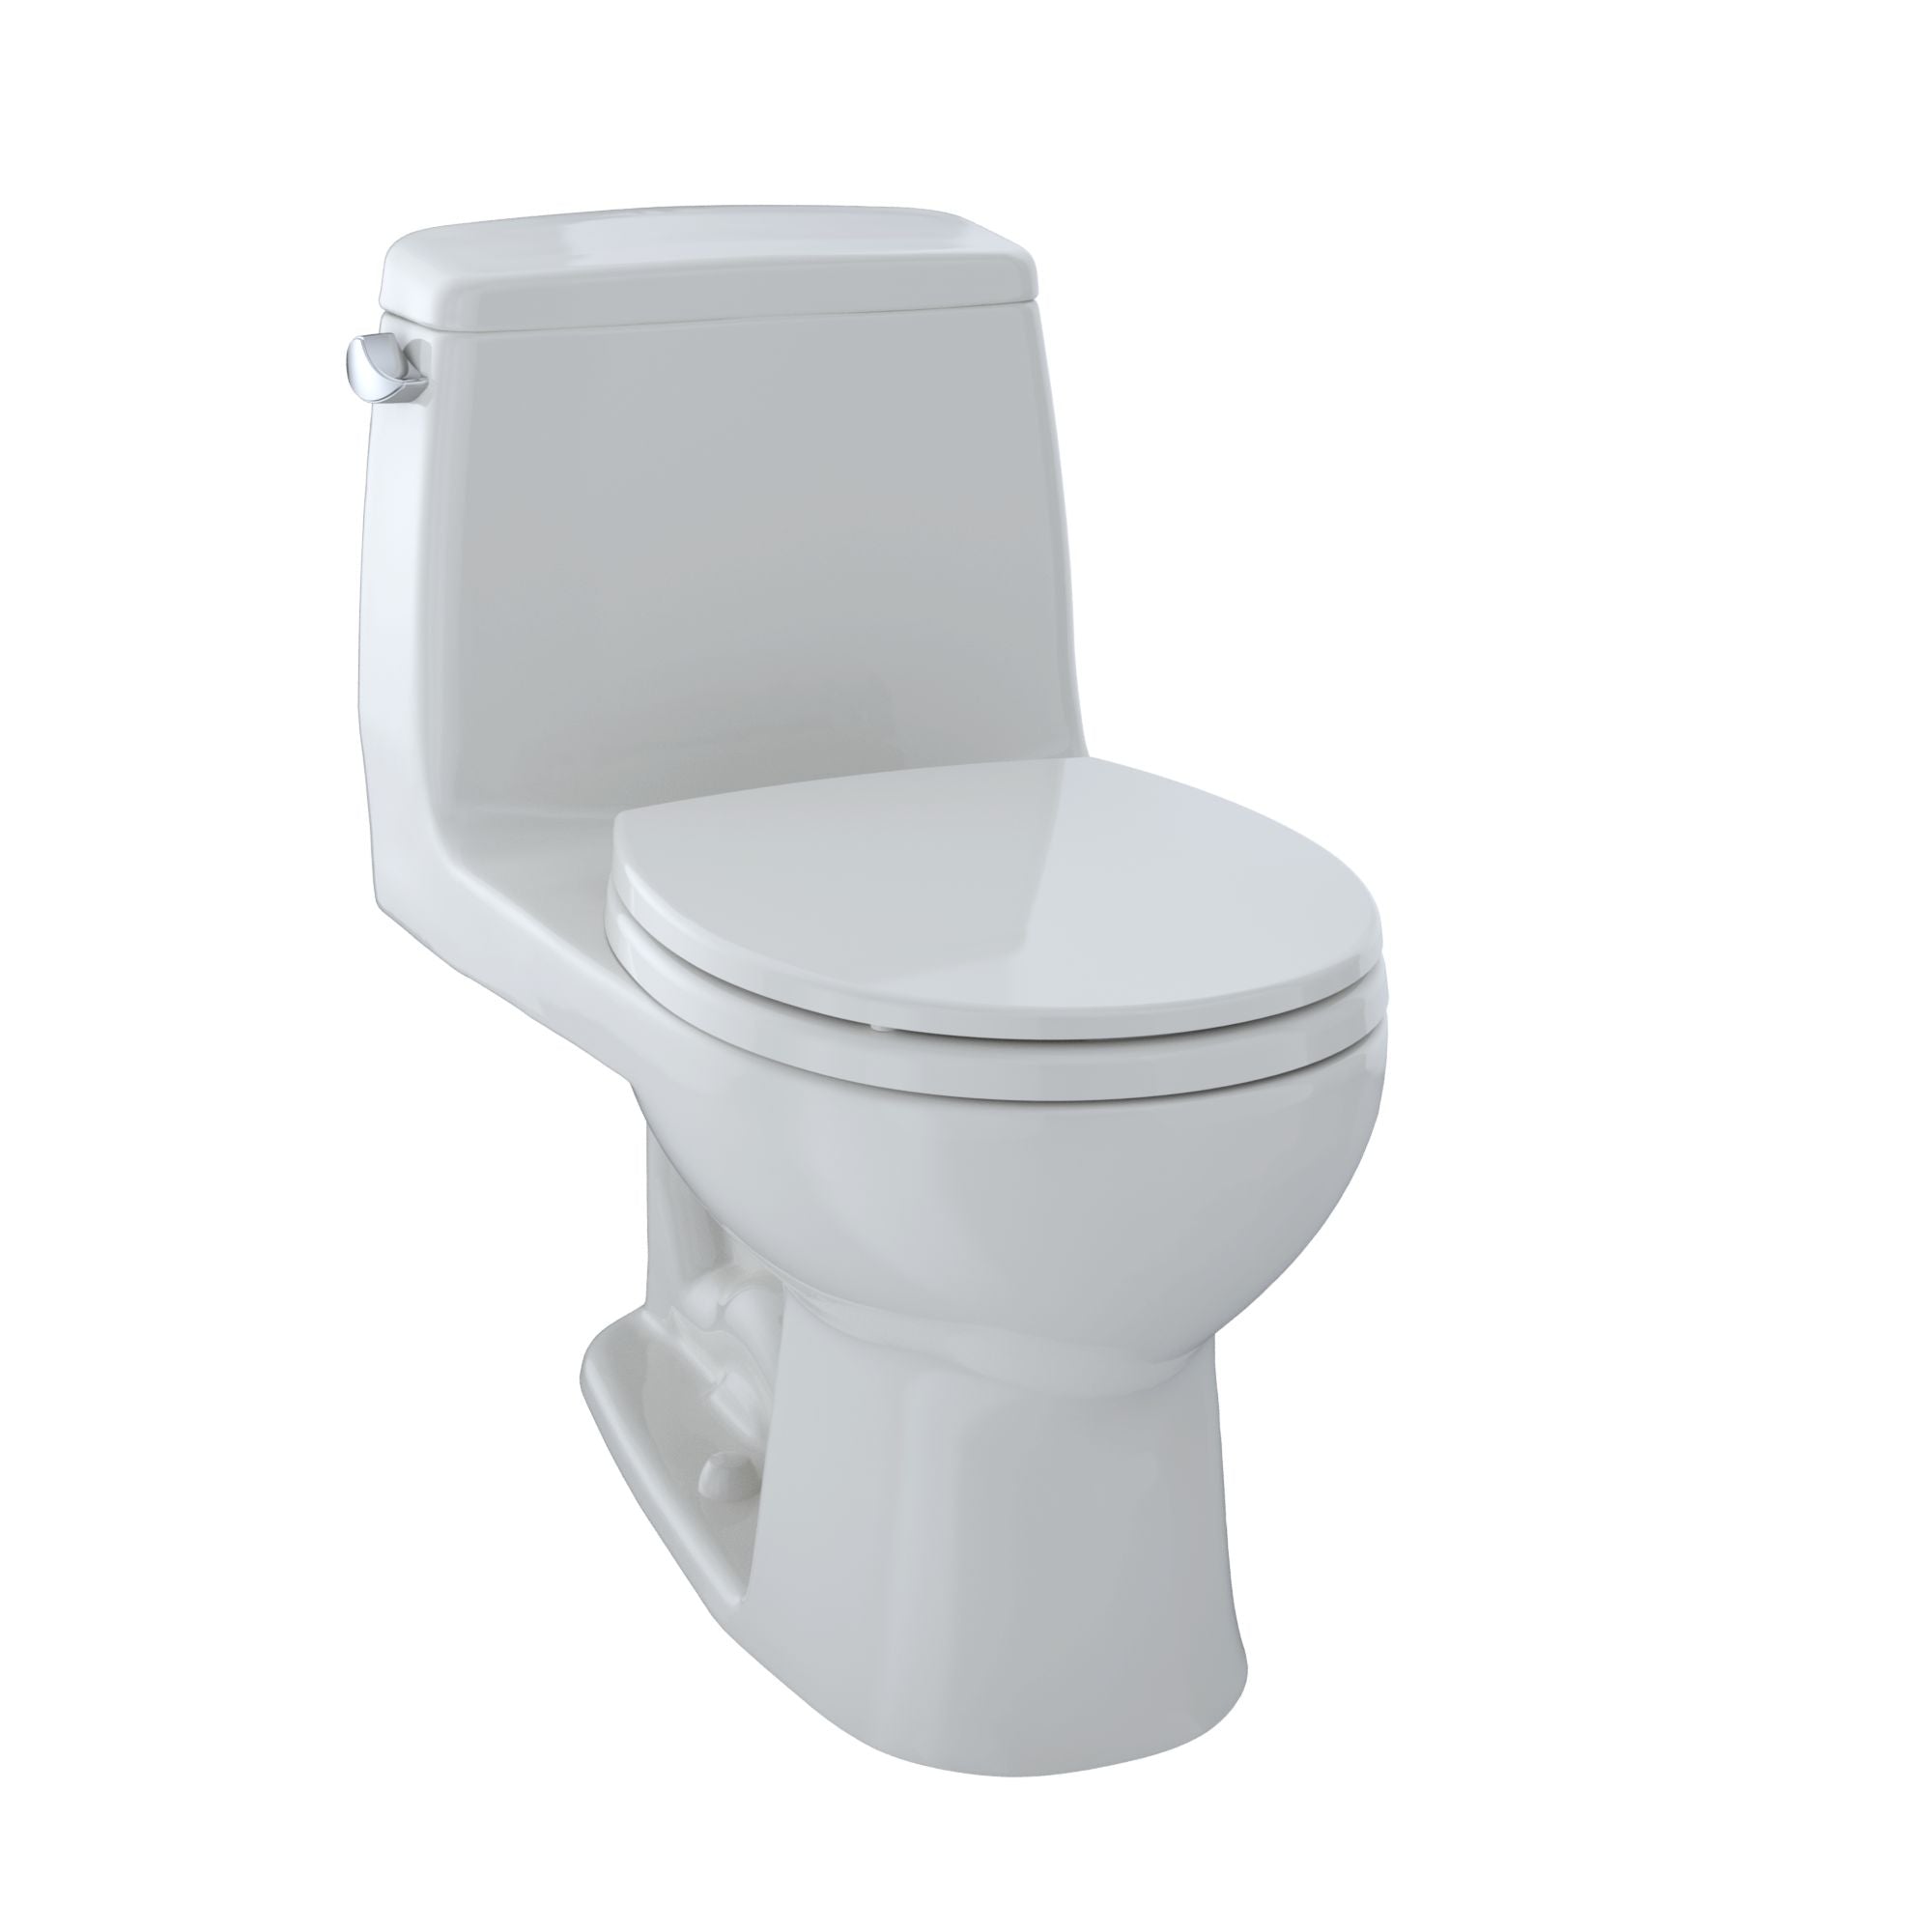 Toto Ultimate One-piece Toilet 1.6 GPF Round Bowl